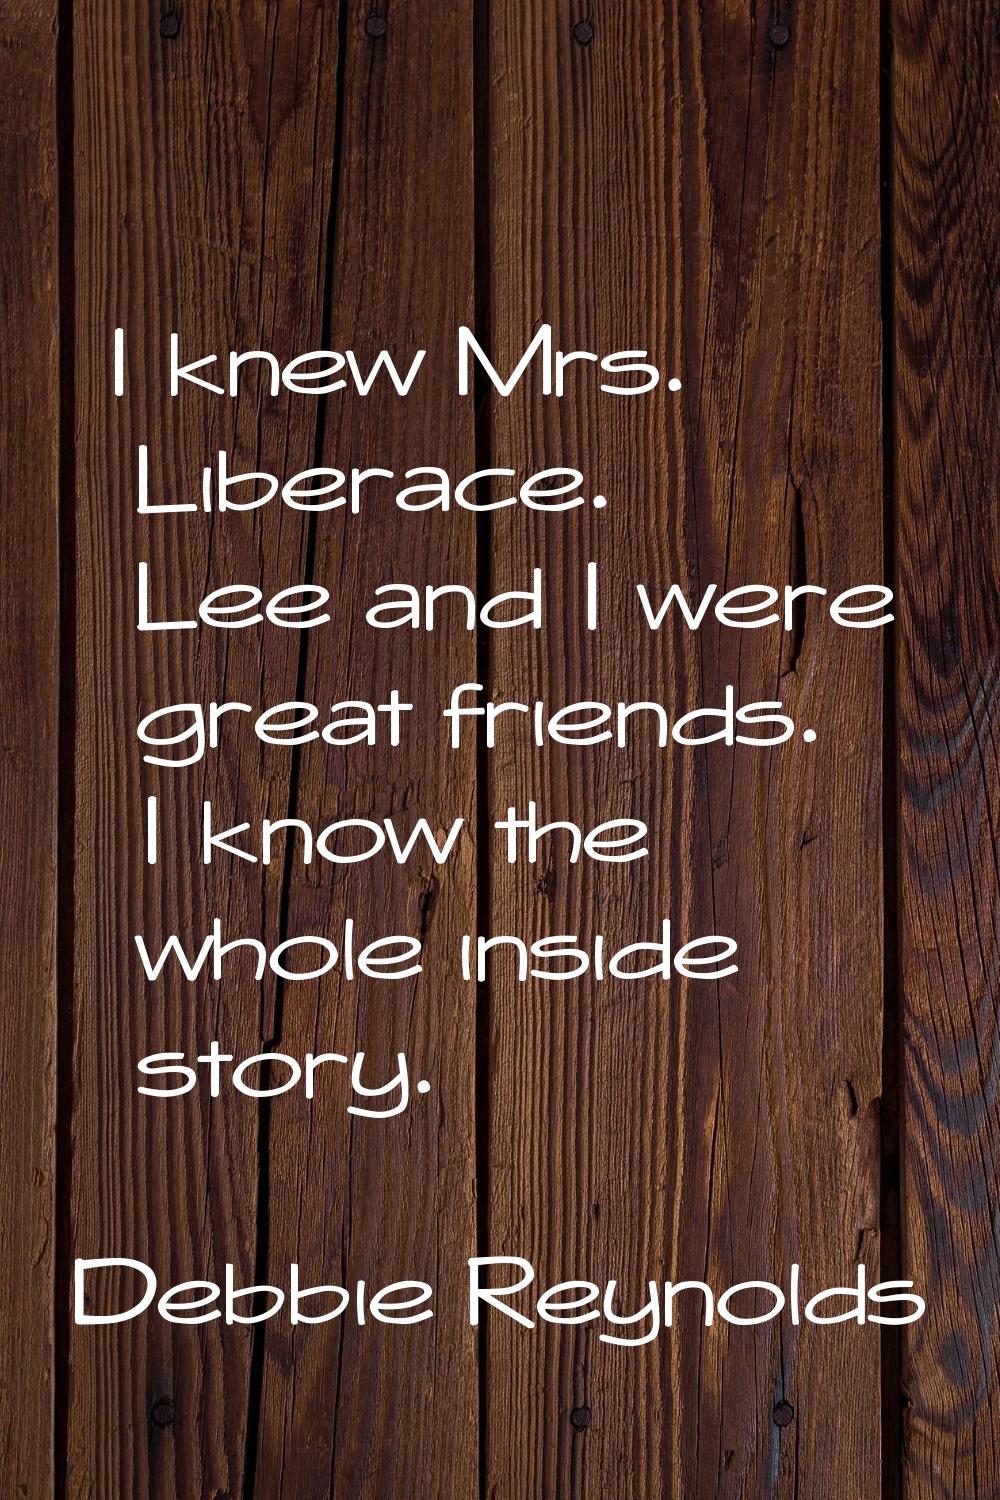 I knew Mrs. Liberace. Lee and I were great friends. I know the whole inside story.